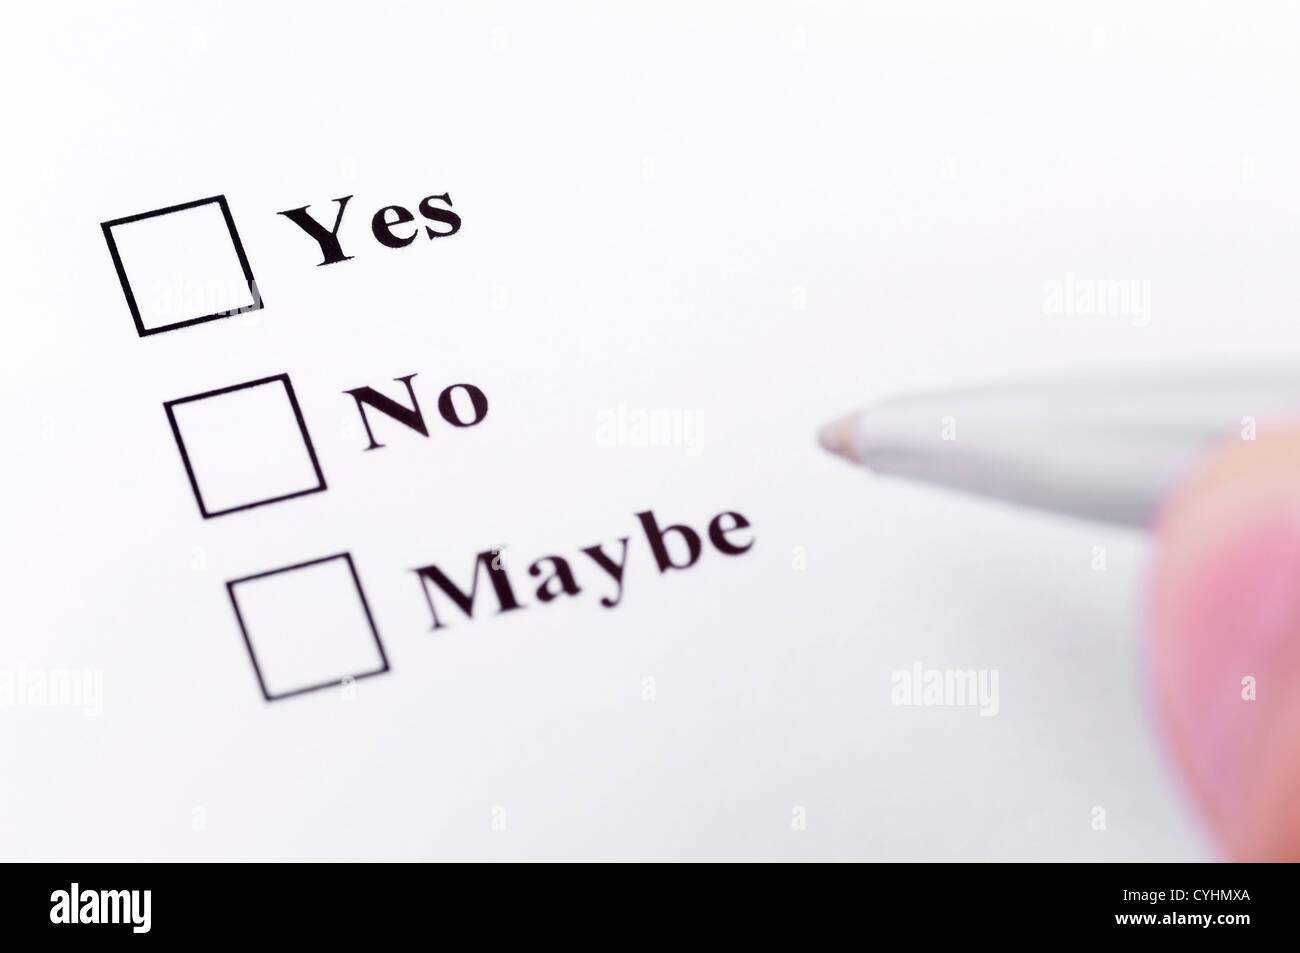 Making your decision. About to choose between yes, no, maybe. Stock Photo